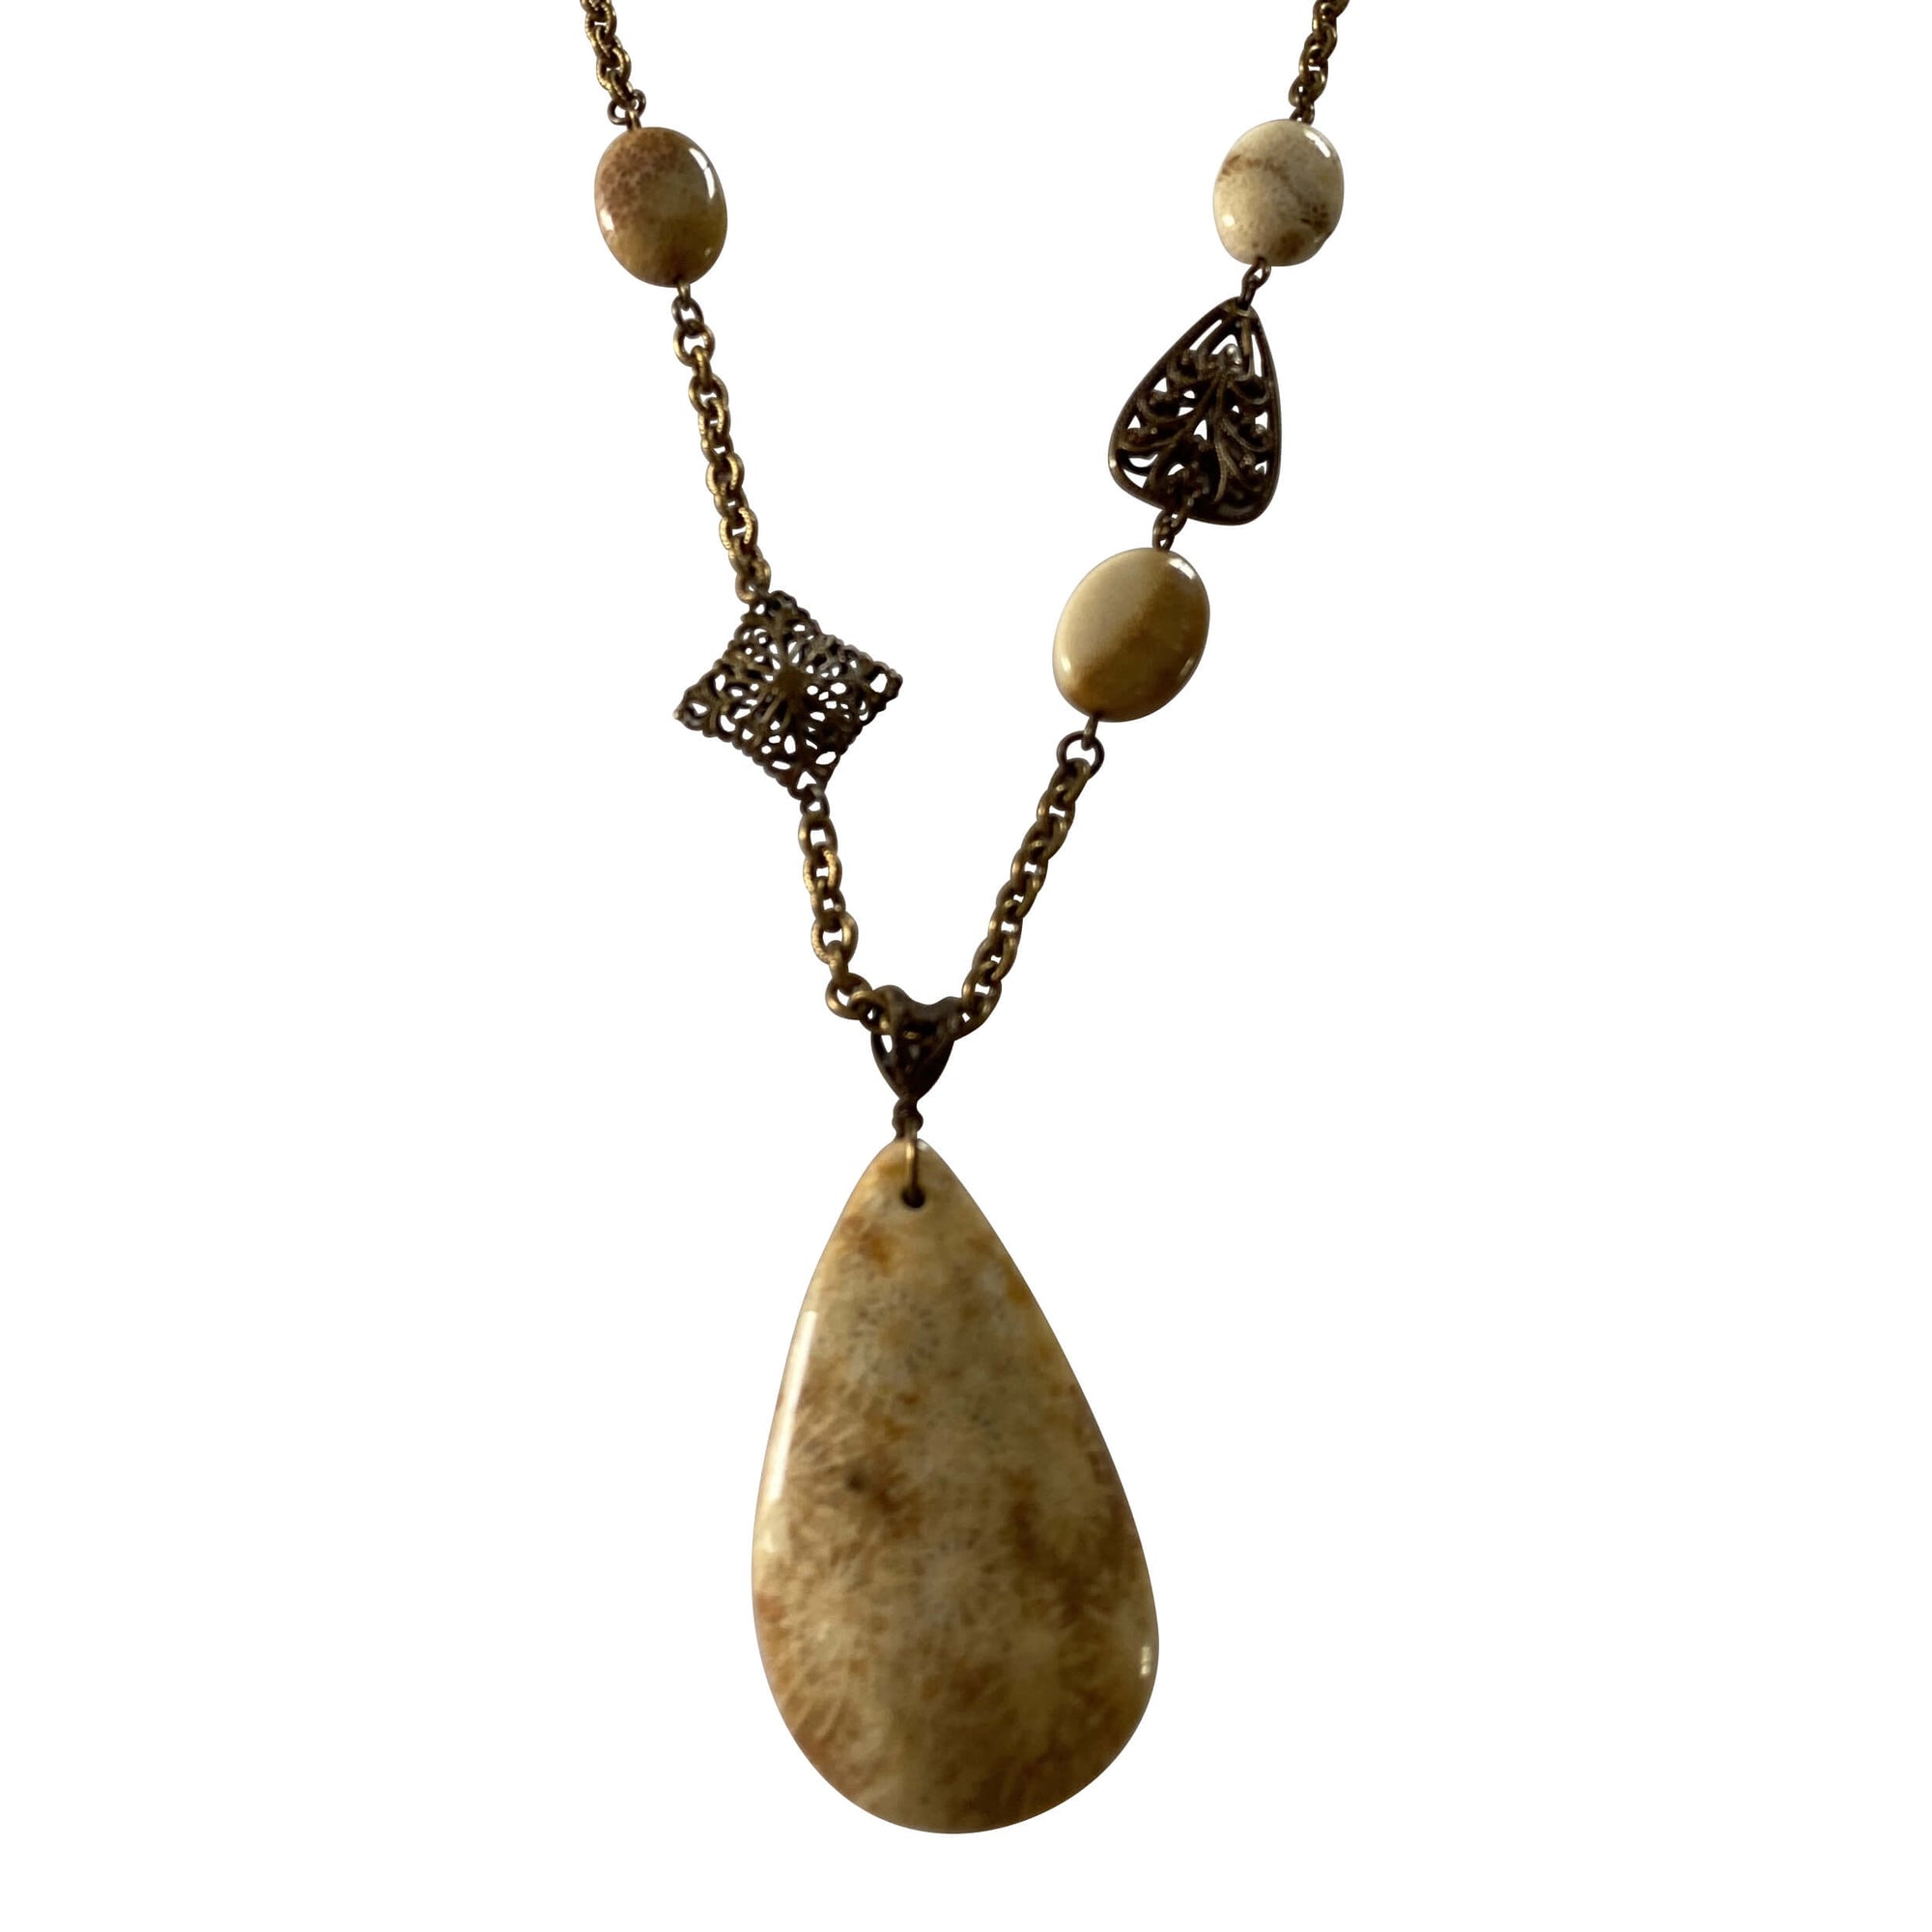 Vintaj Brass Chain and Fossil Coral Stone Pendant Necklace with Toggle Clasp-Necklaces- Creative Jewelry by Marcia